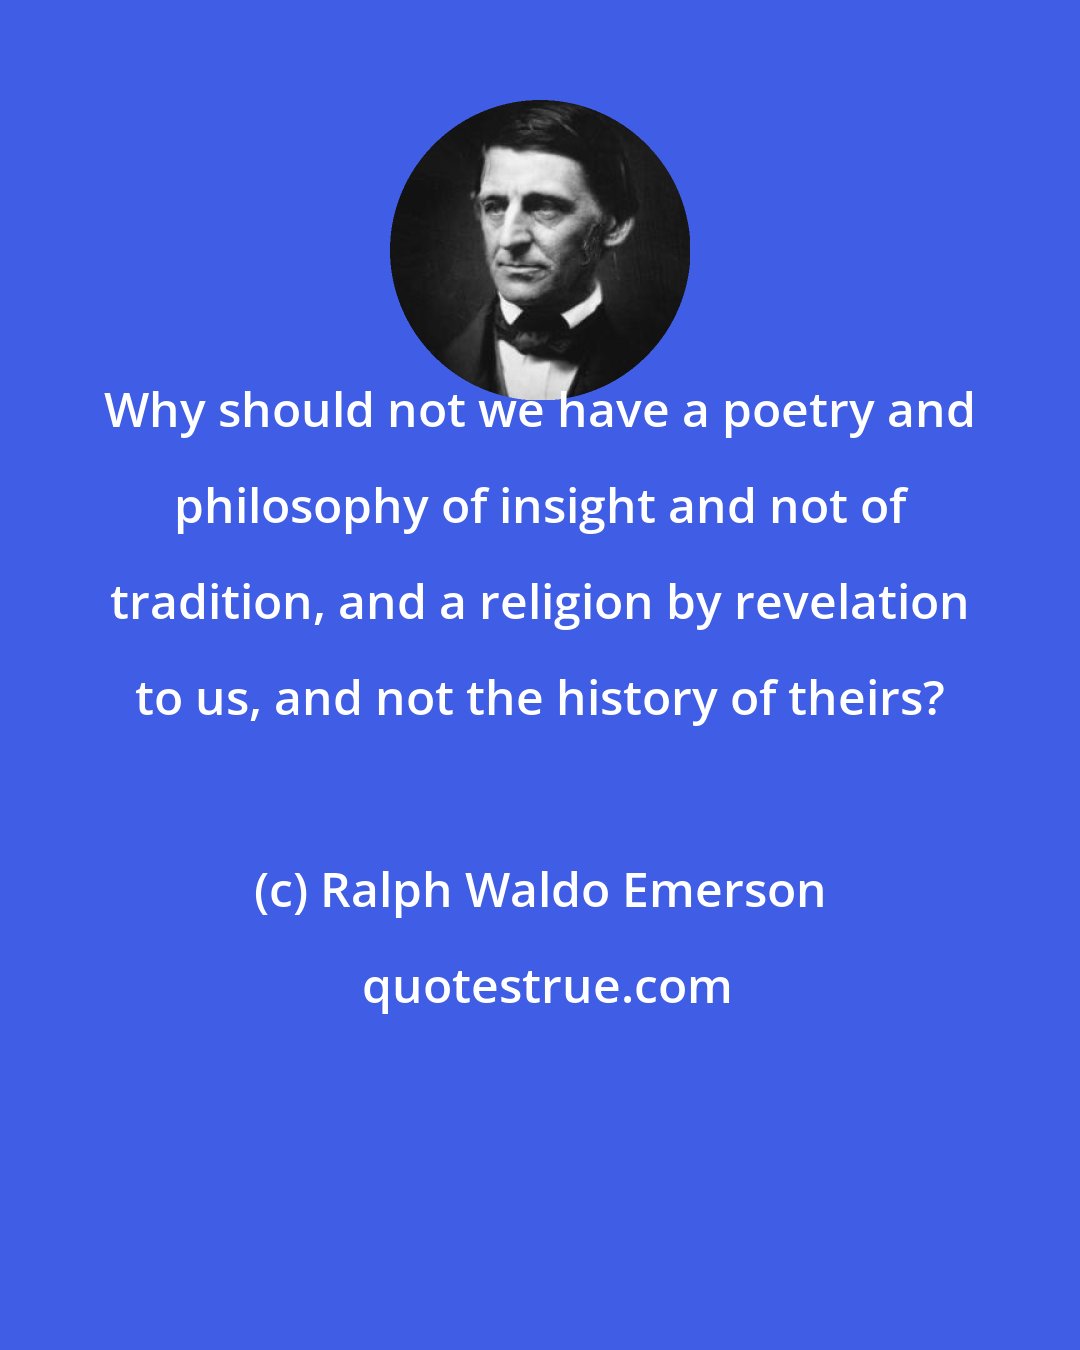 Ralph Waldo Emerson: Why should not we have a poetry and philosophy of insight and not of tradition, and a religion by revelation to us, and not the history of theirs?